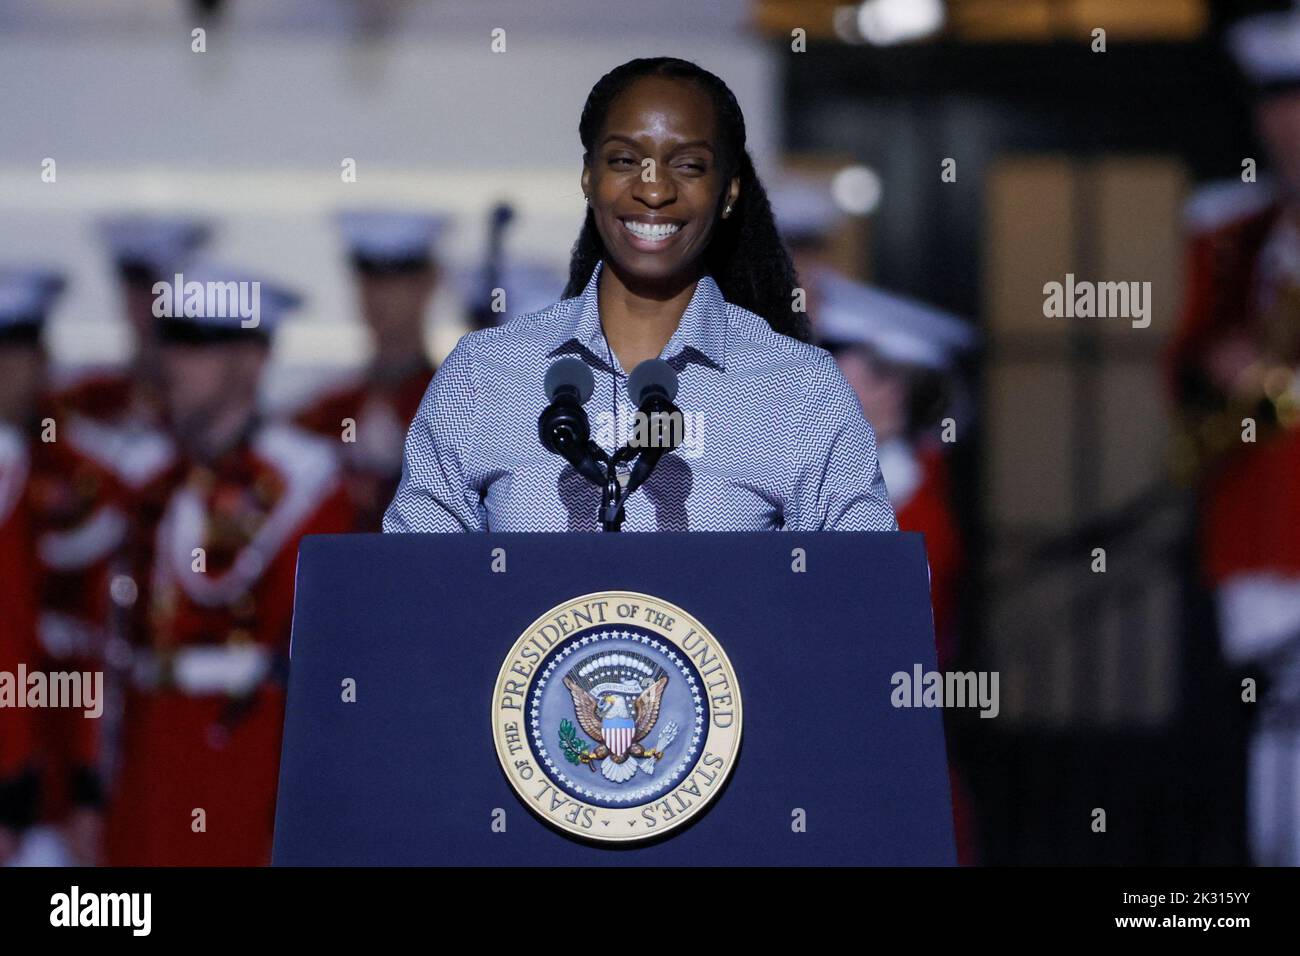 Athen White, Director of Youth Development & Community Engagement, Supporting and Mentoring Youth Advocates and Leaders (SMYAL) attends a performance by British rocker Elton John at the White House in Washington, U.S., September 23, 2022. REUTERS/Evelyn Hockstein Stock Photo